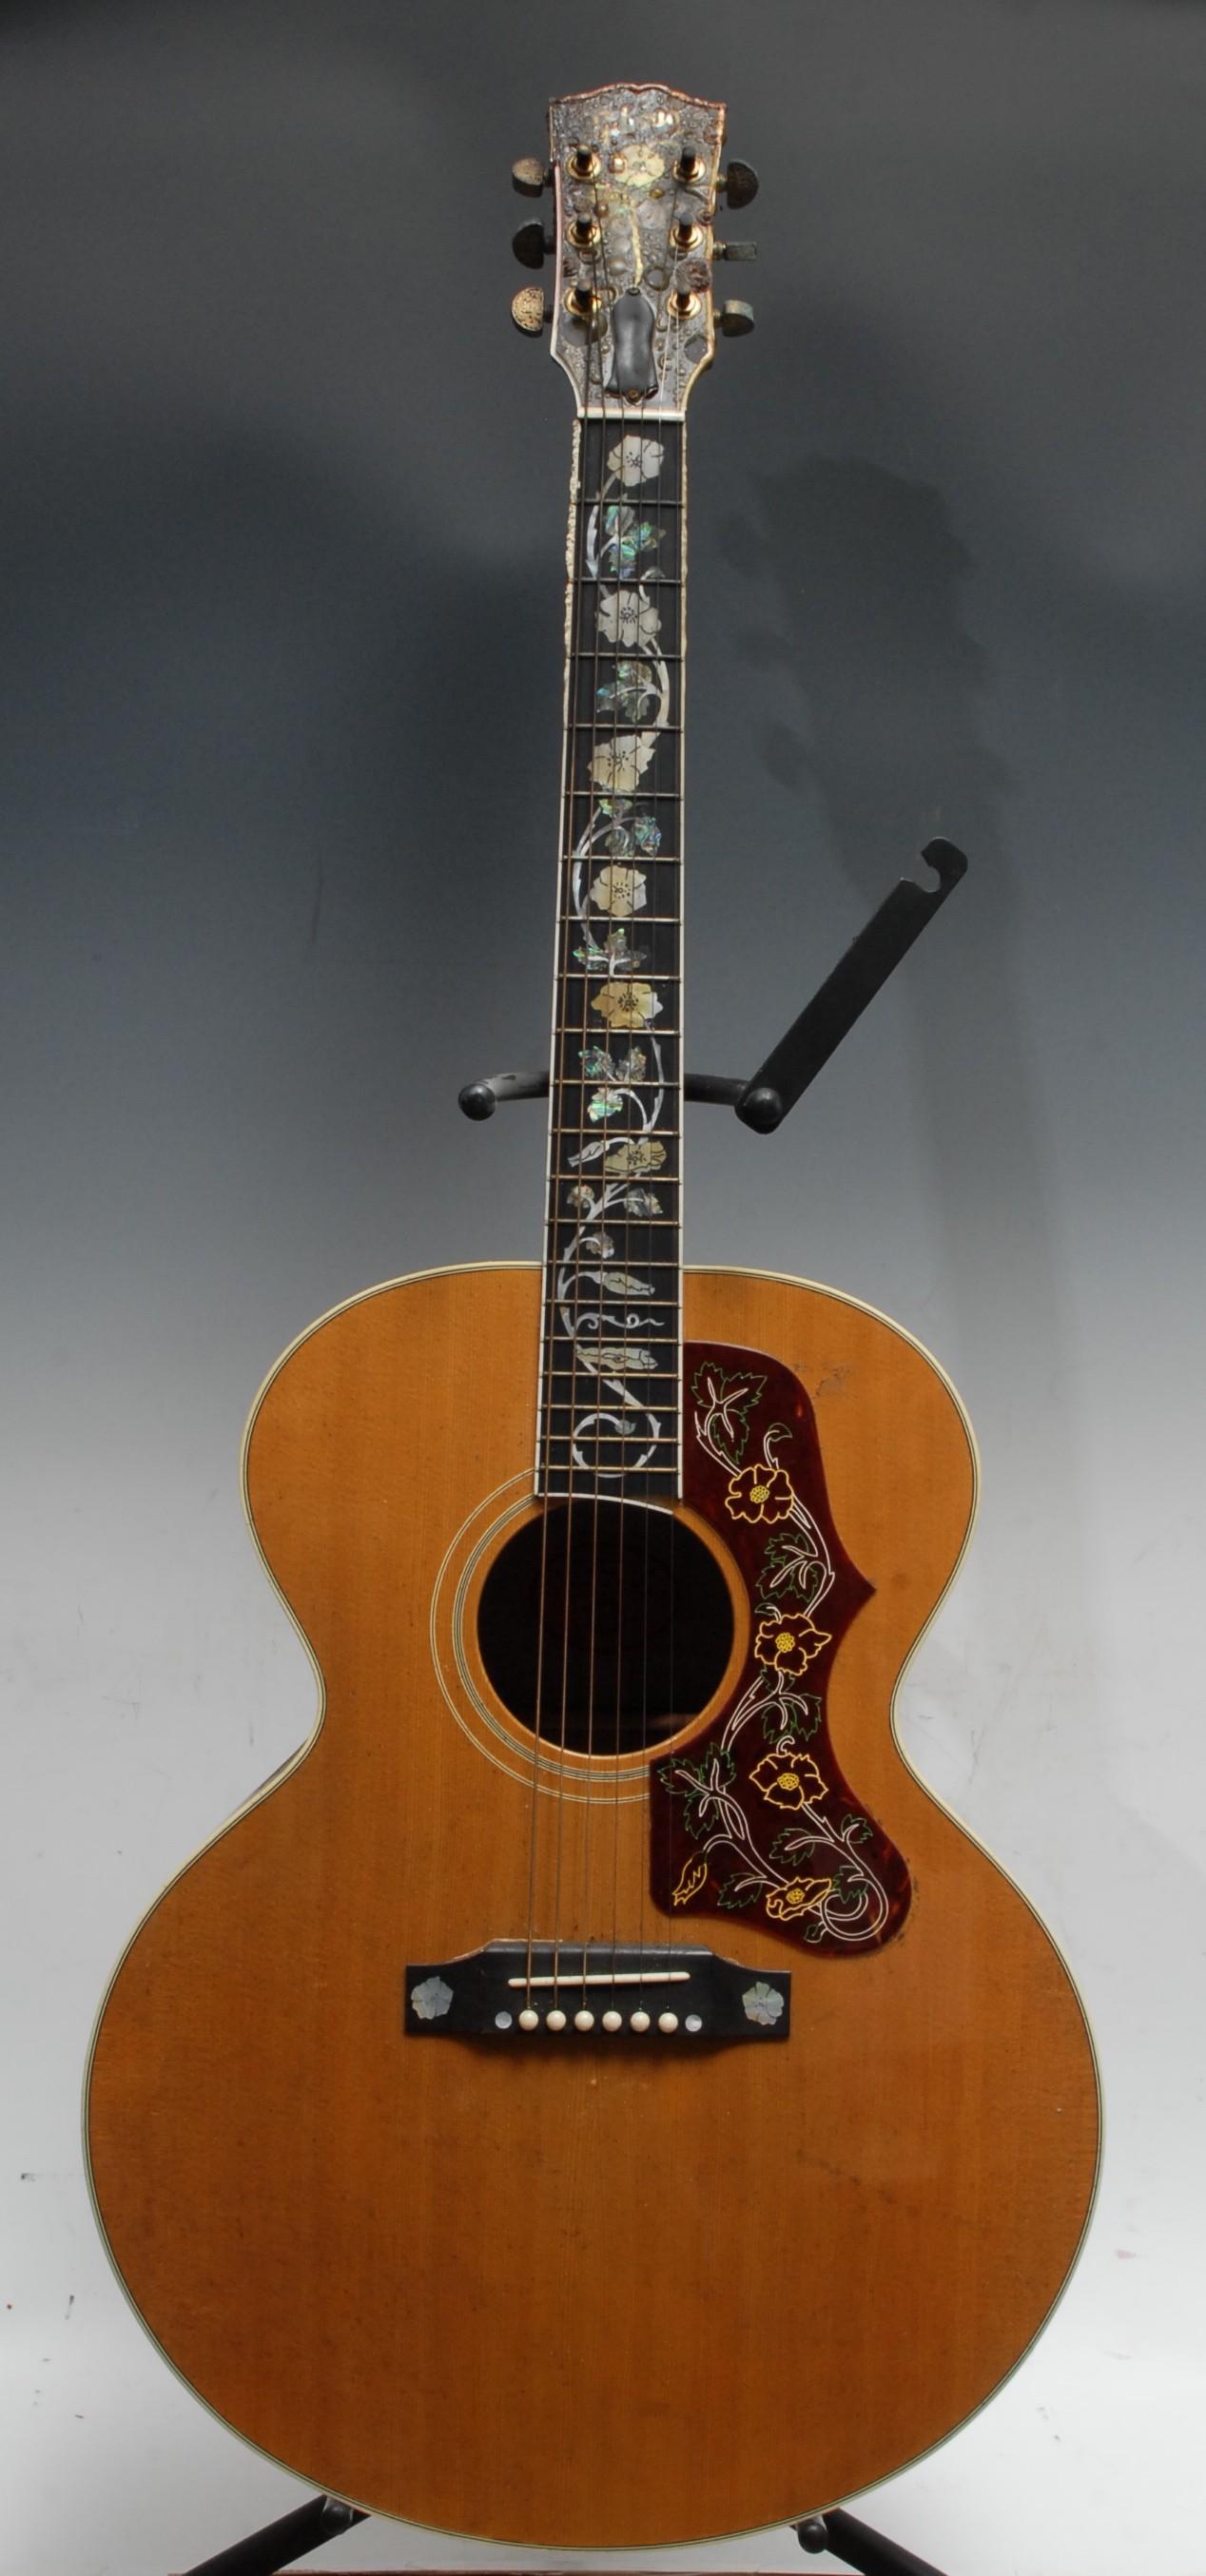 A Gibson J-185 Rose Vine Acoustic guitar, Bozeman, Montana USA, figured maple body back and sides, - Image 2 of 18